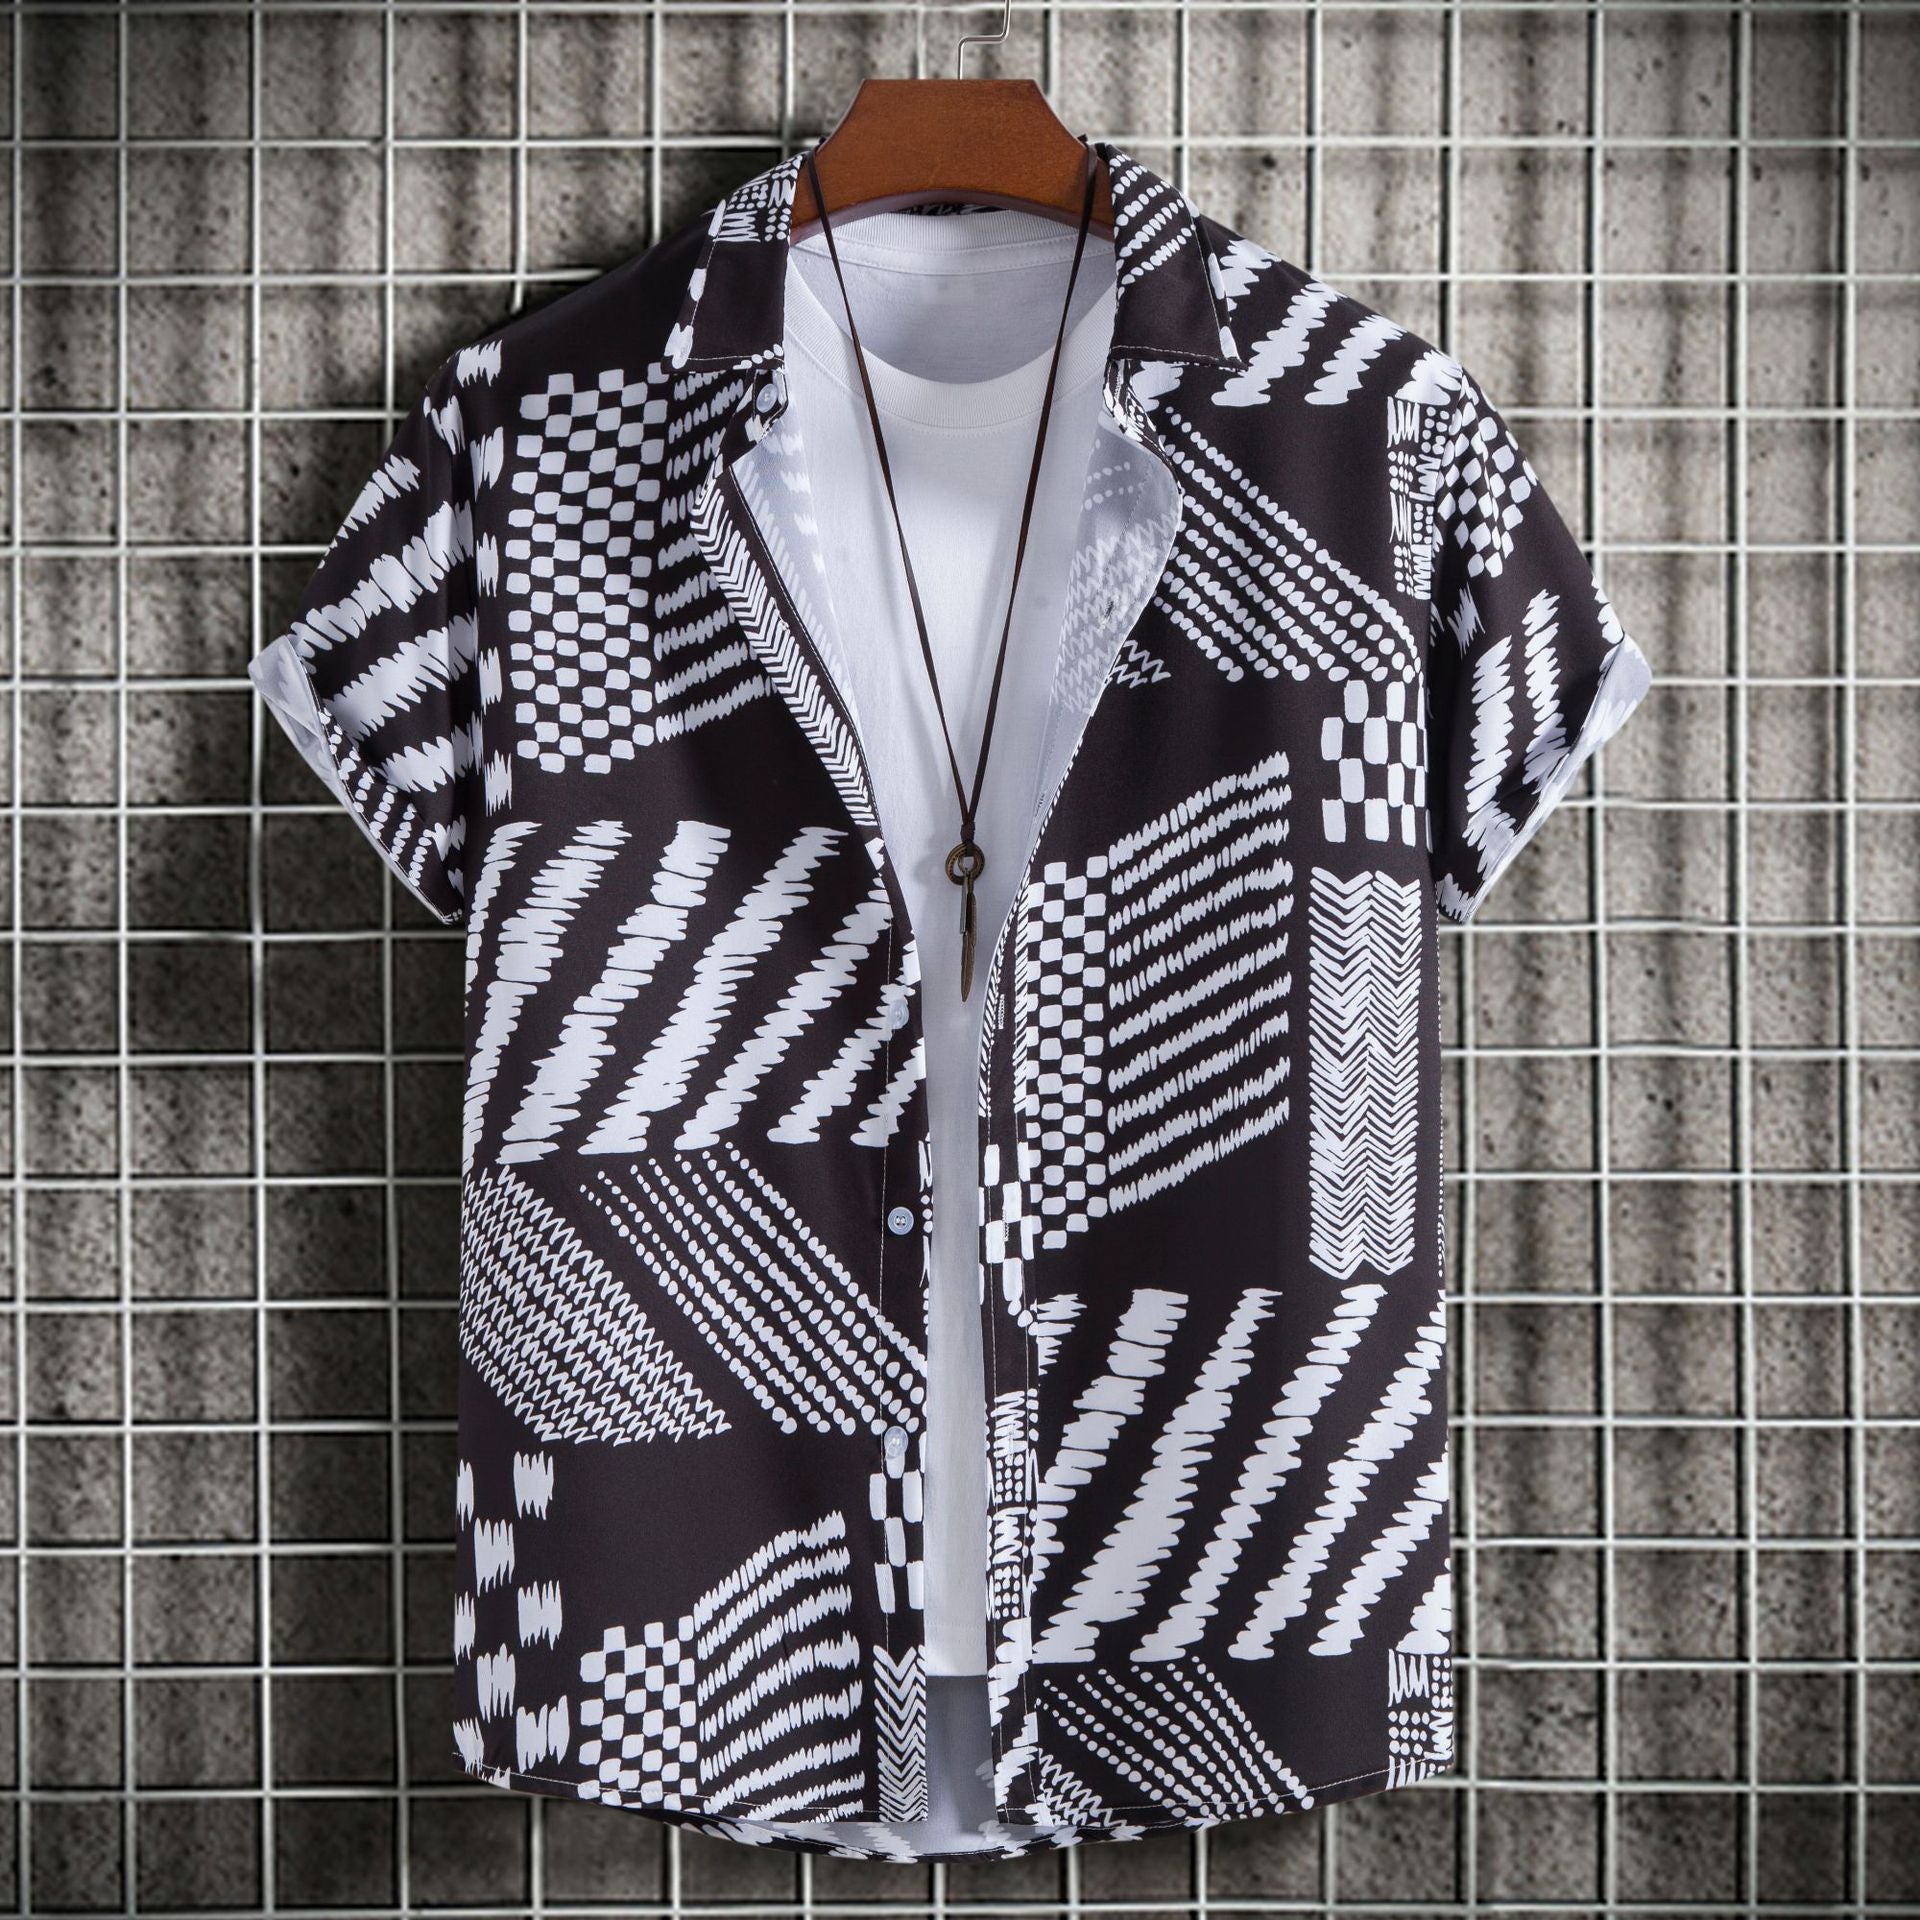 C234 - Men's Fashion Slim-fit Printed Short Sleeve Button Up Shirts - mens button up shirt at TFC&H Co.